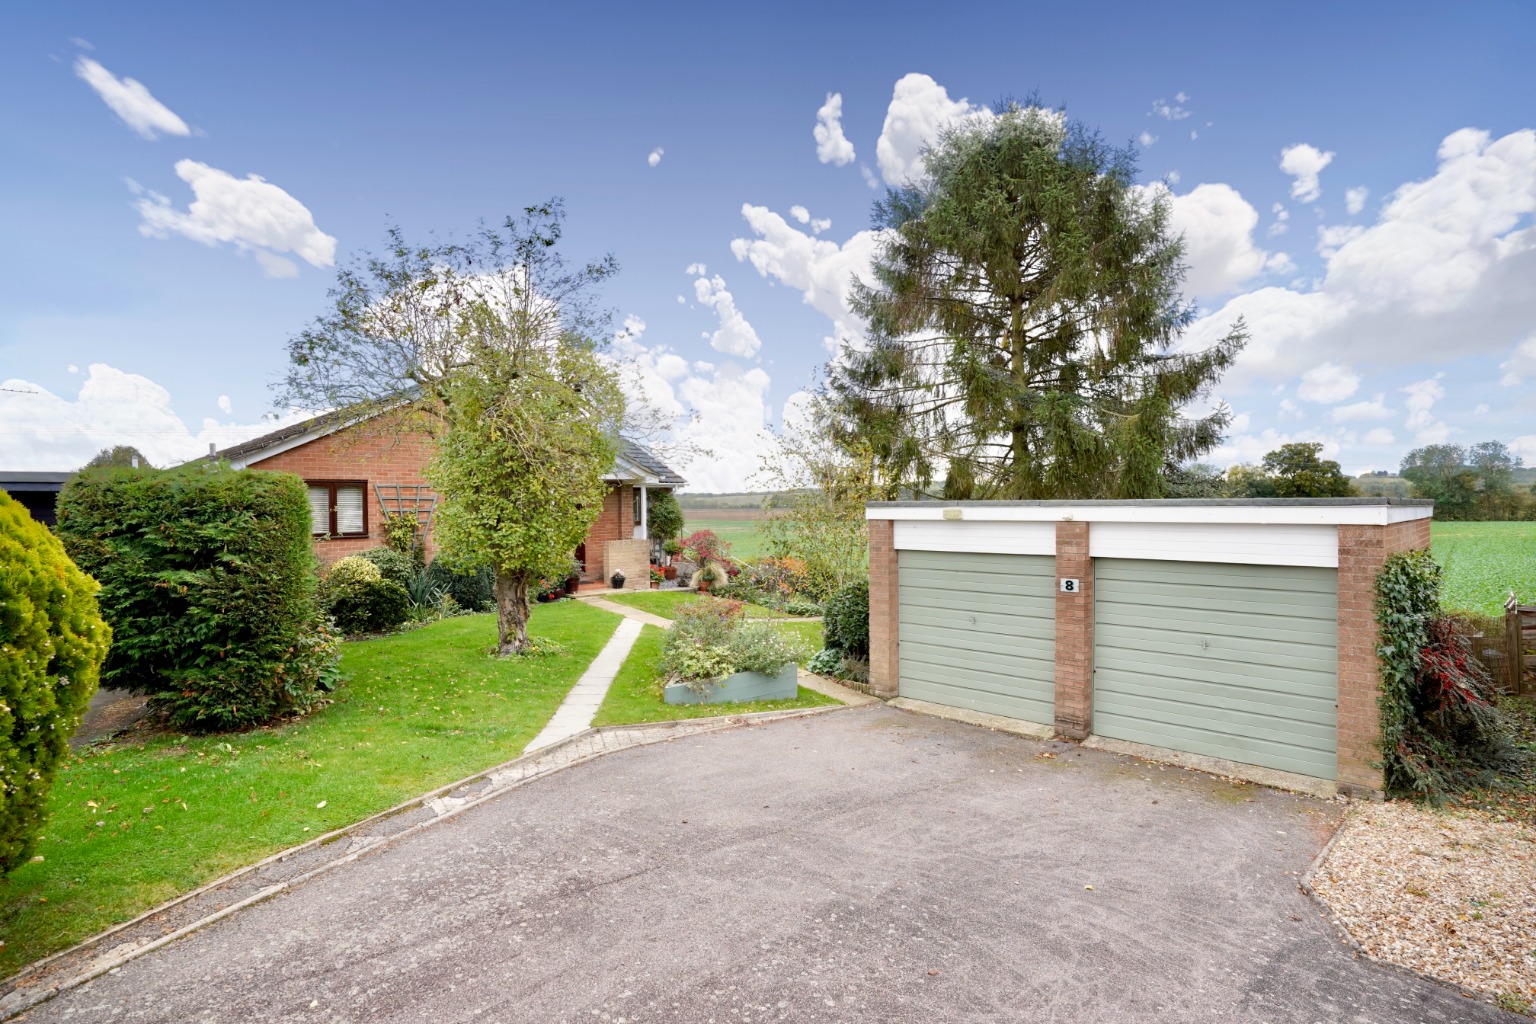 We’re delighted to offer this stunning four bedroom detatched bungalow situated in the picturesque and desirable village of Ellington, which is close to the towns of Huntingdon and St Neots, and benefits from excellent links to London and the North.   The accommodation offers an entrance hall/porch,